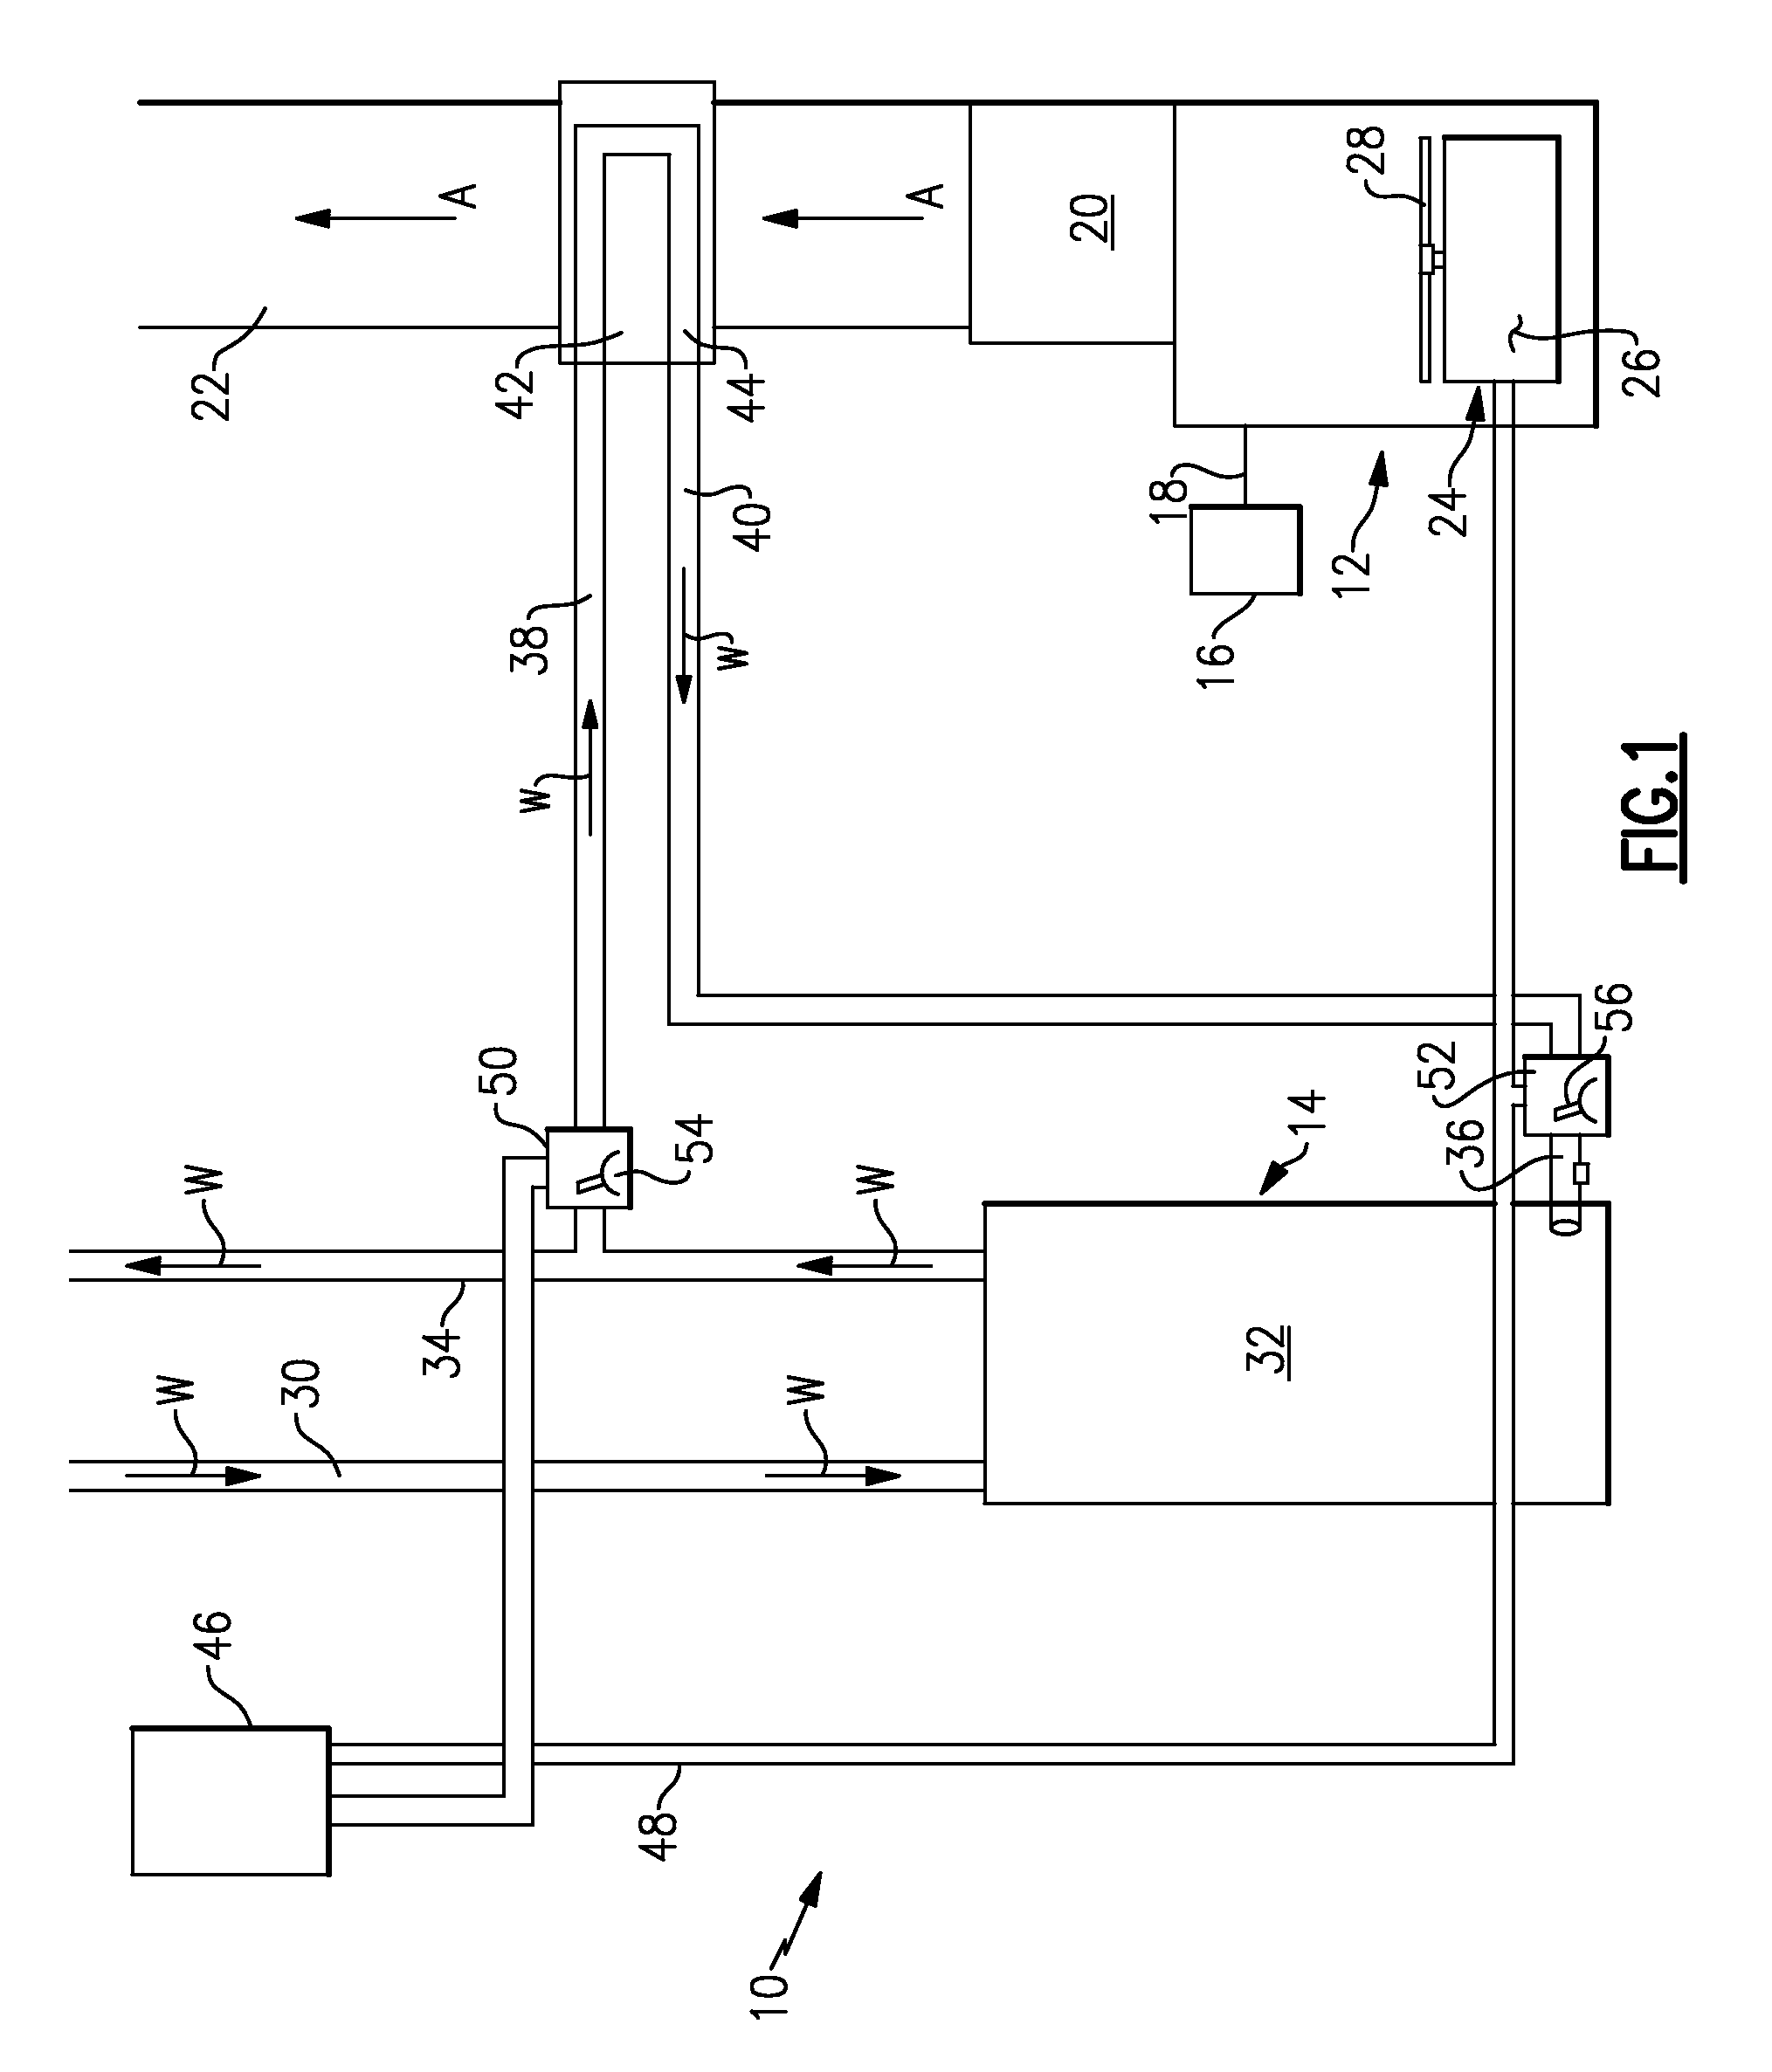 Secondary heating system